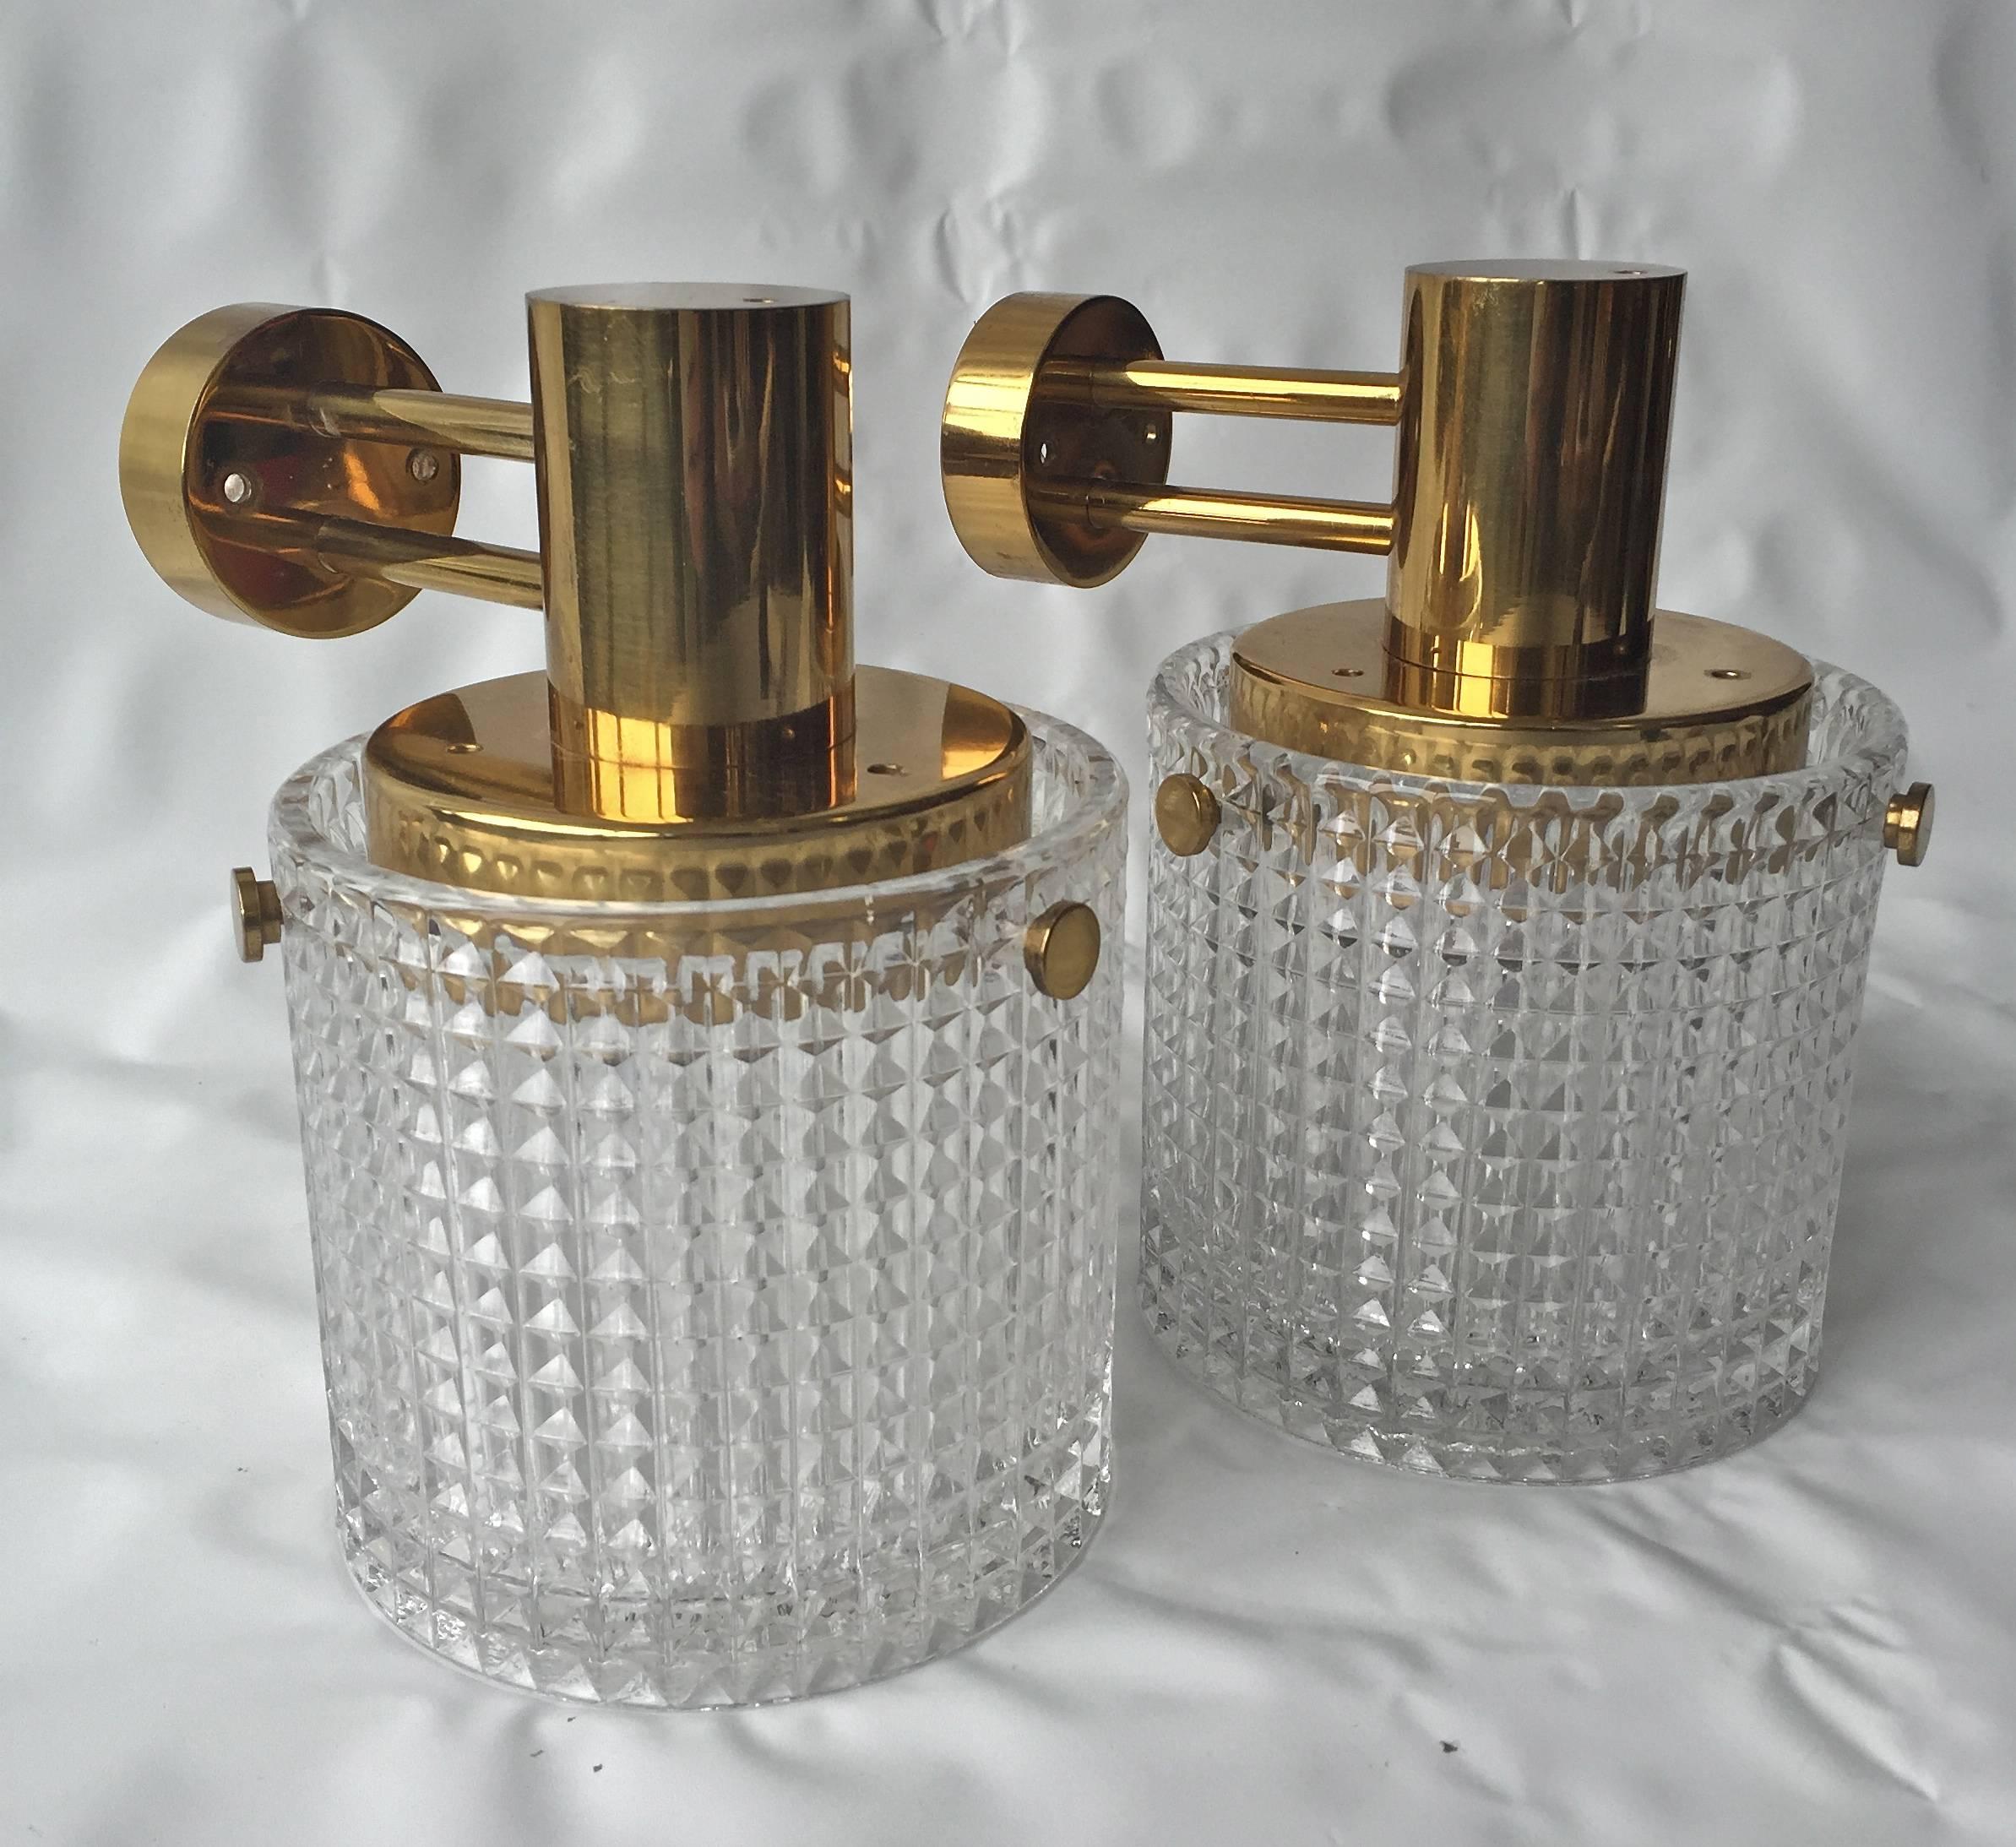 A pair of up or down head mounted wall lights, Orrefors attributed, Sweden, circa 1970s. Polished brass and textured glass. Measures: Diameter 5.5